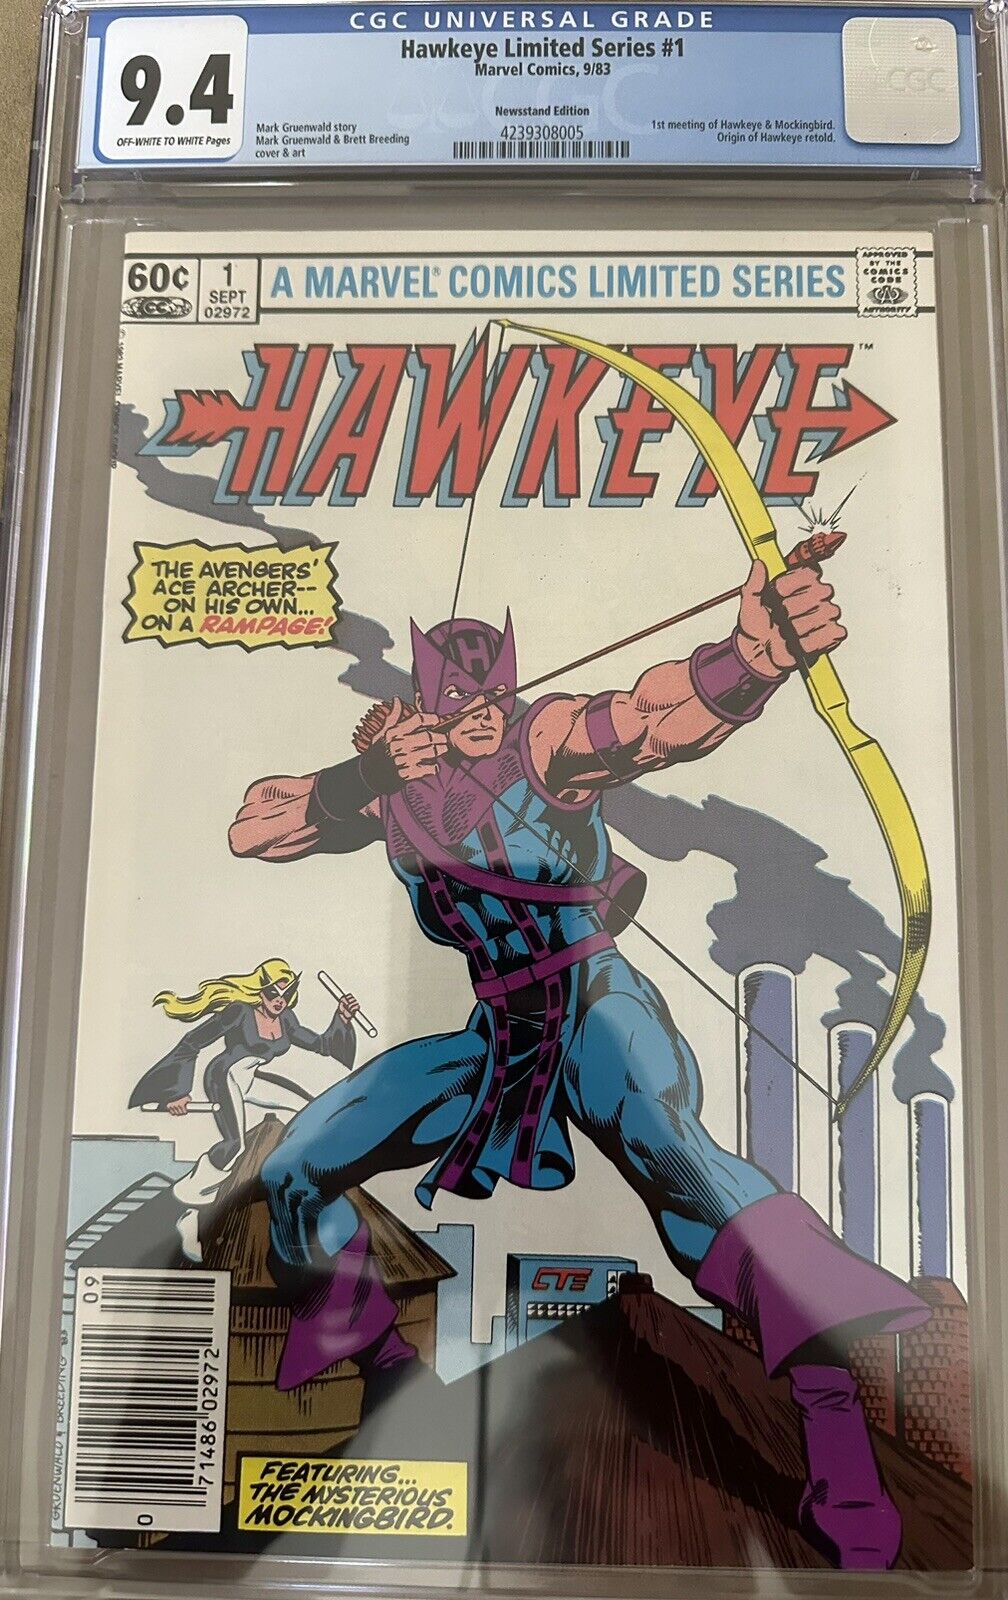 Hawkeye Limited Series #1 CGC 9.4 NM Off White-White Pages Newsstand